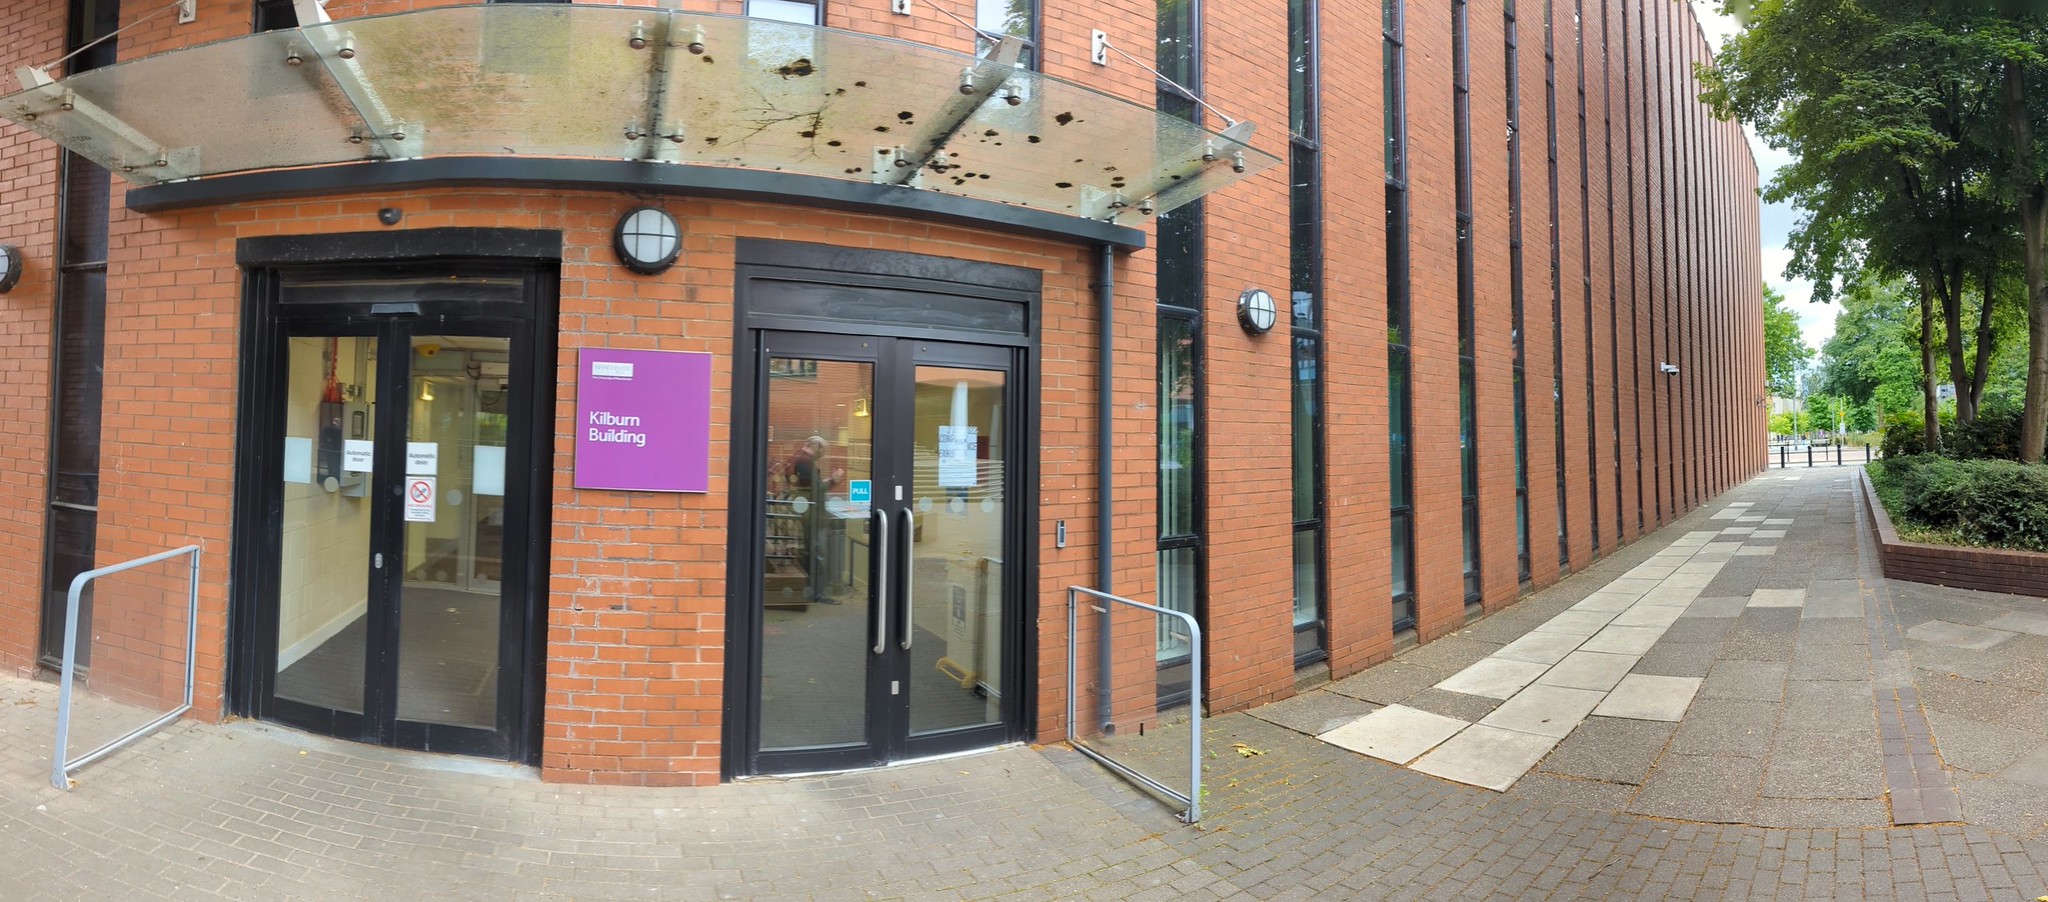 A panoramic picture of the North entrance of the Kilburn building with the Oxford Road on the right hand side of the picture.